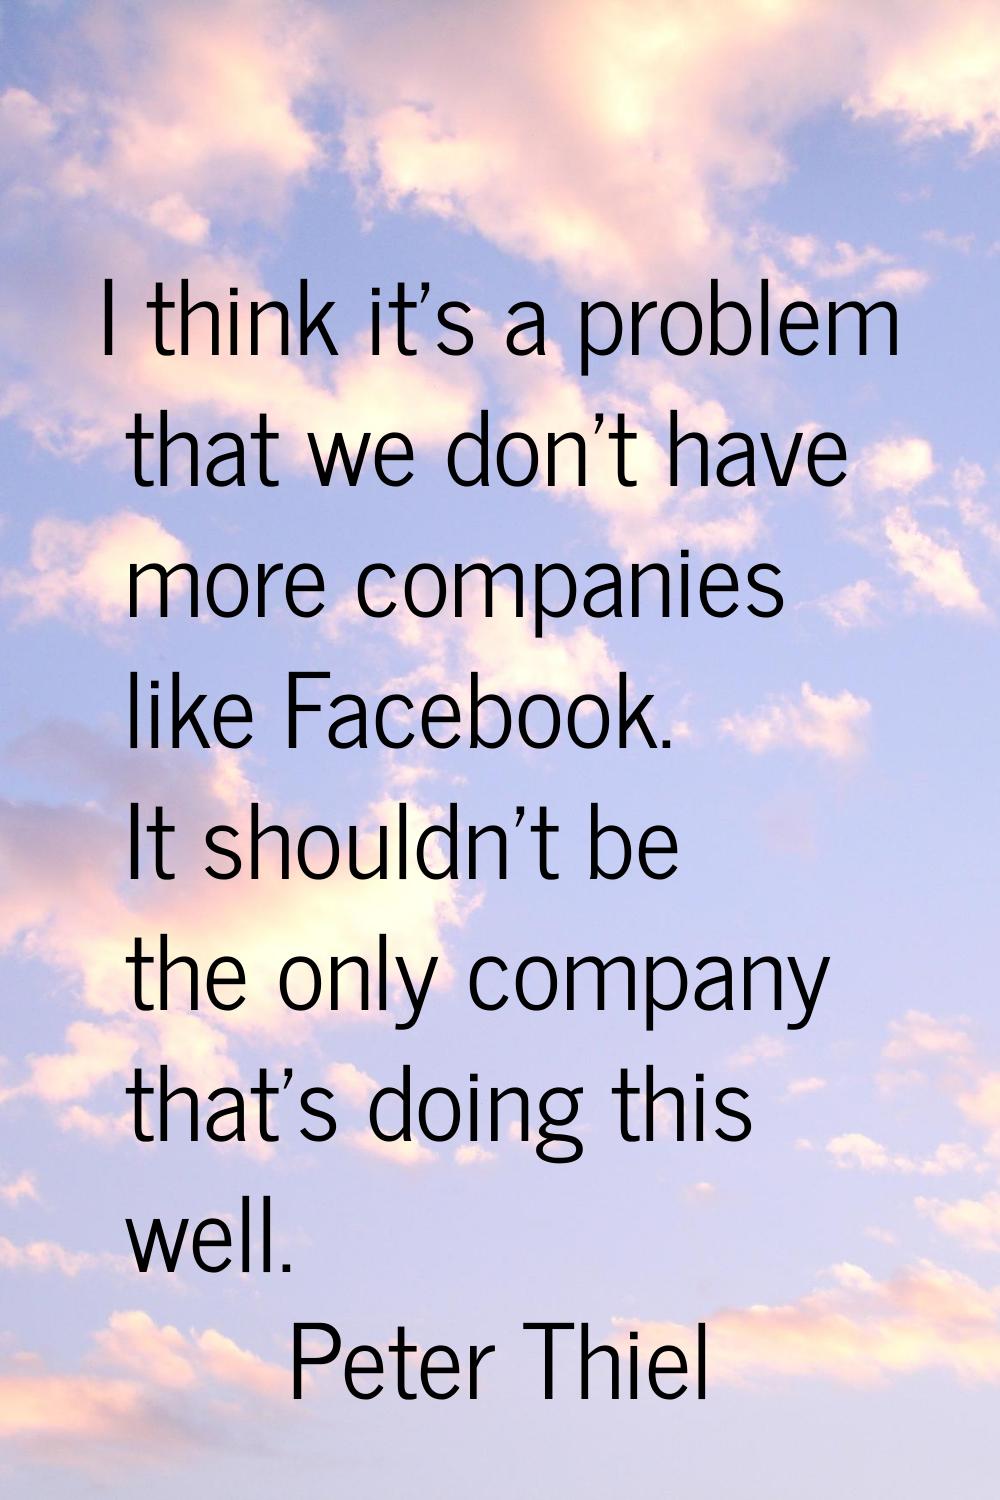 I think it's a problem that we don't have more companies like Facebook. It shouldn't be the only co